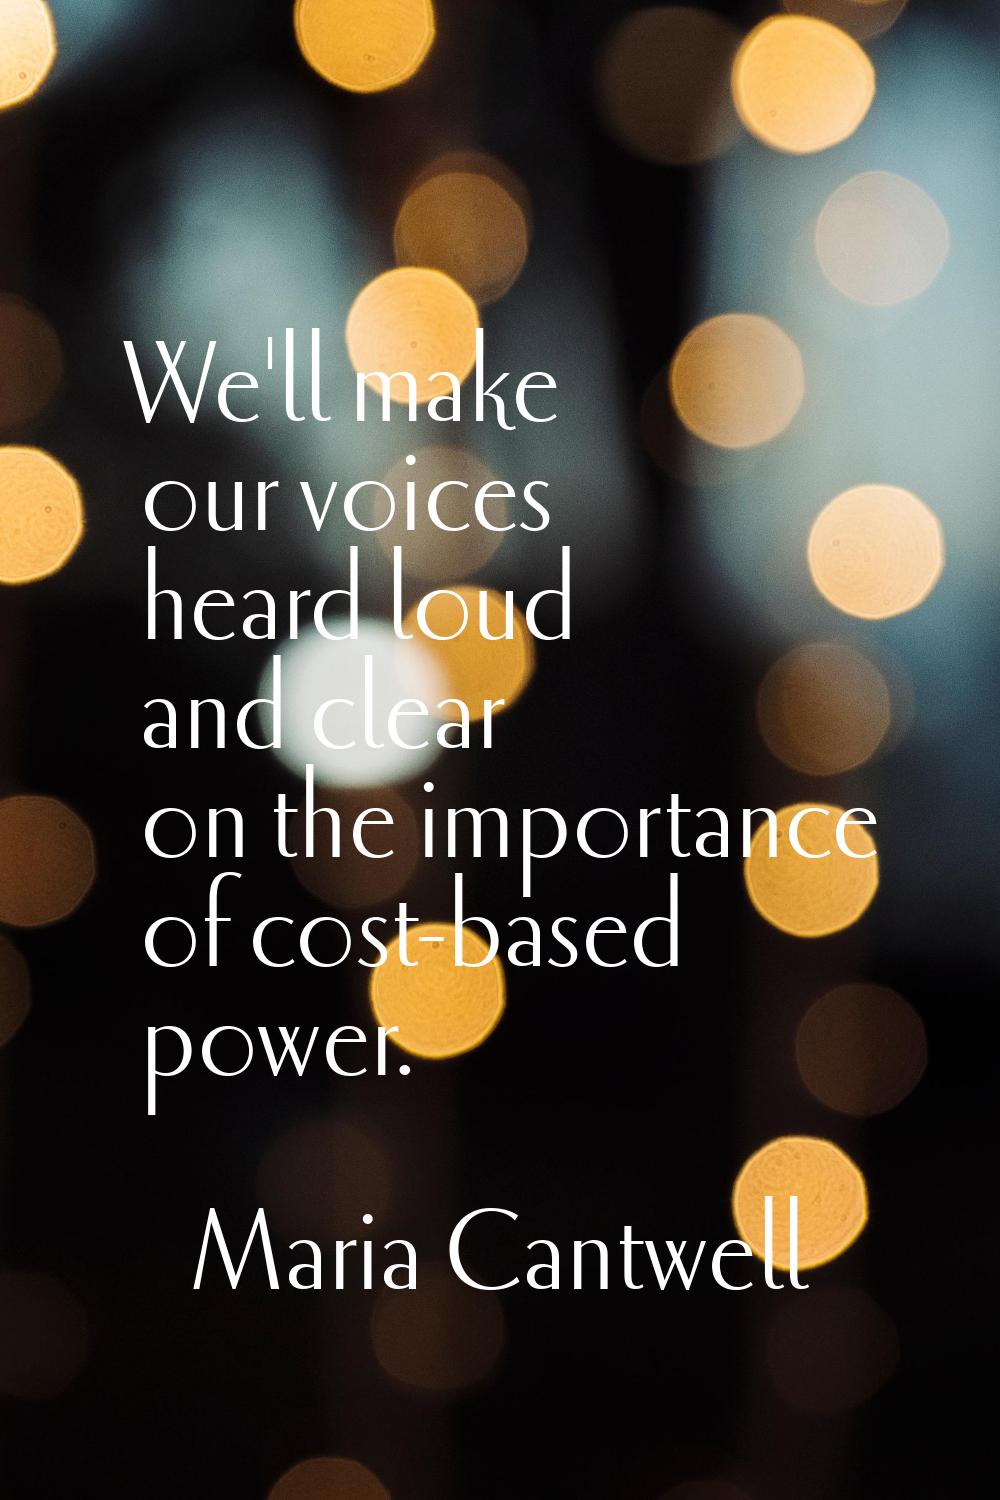 We'll make our voices heard loud and clear on the importance of cost-based power.